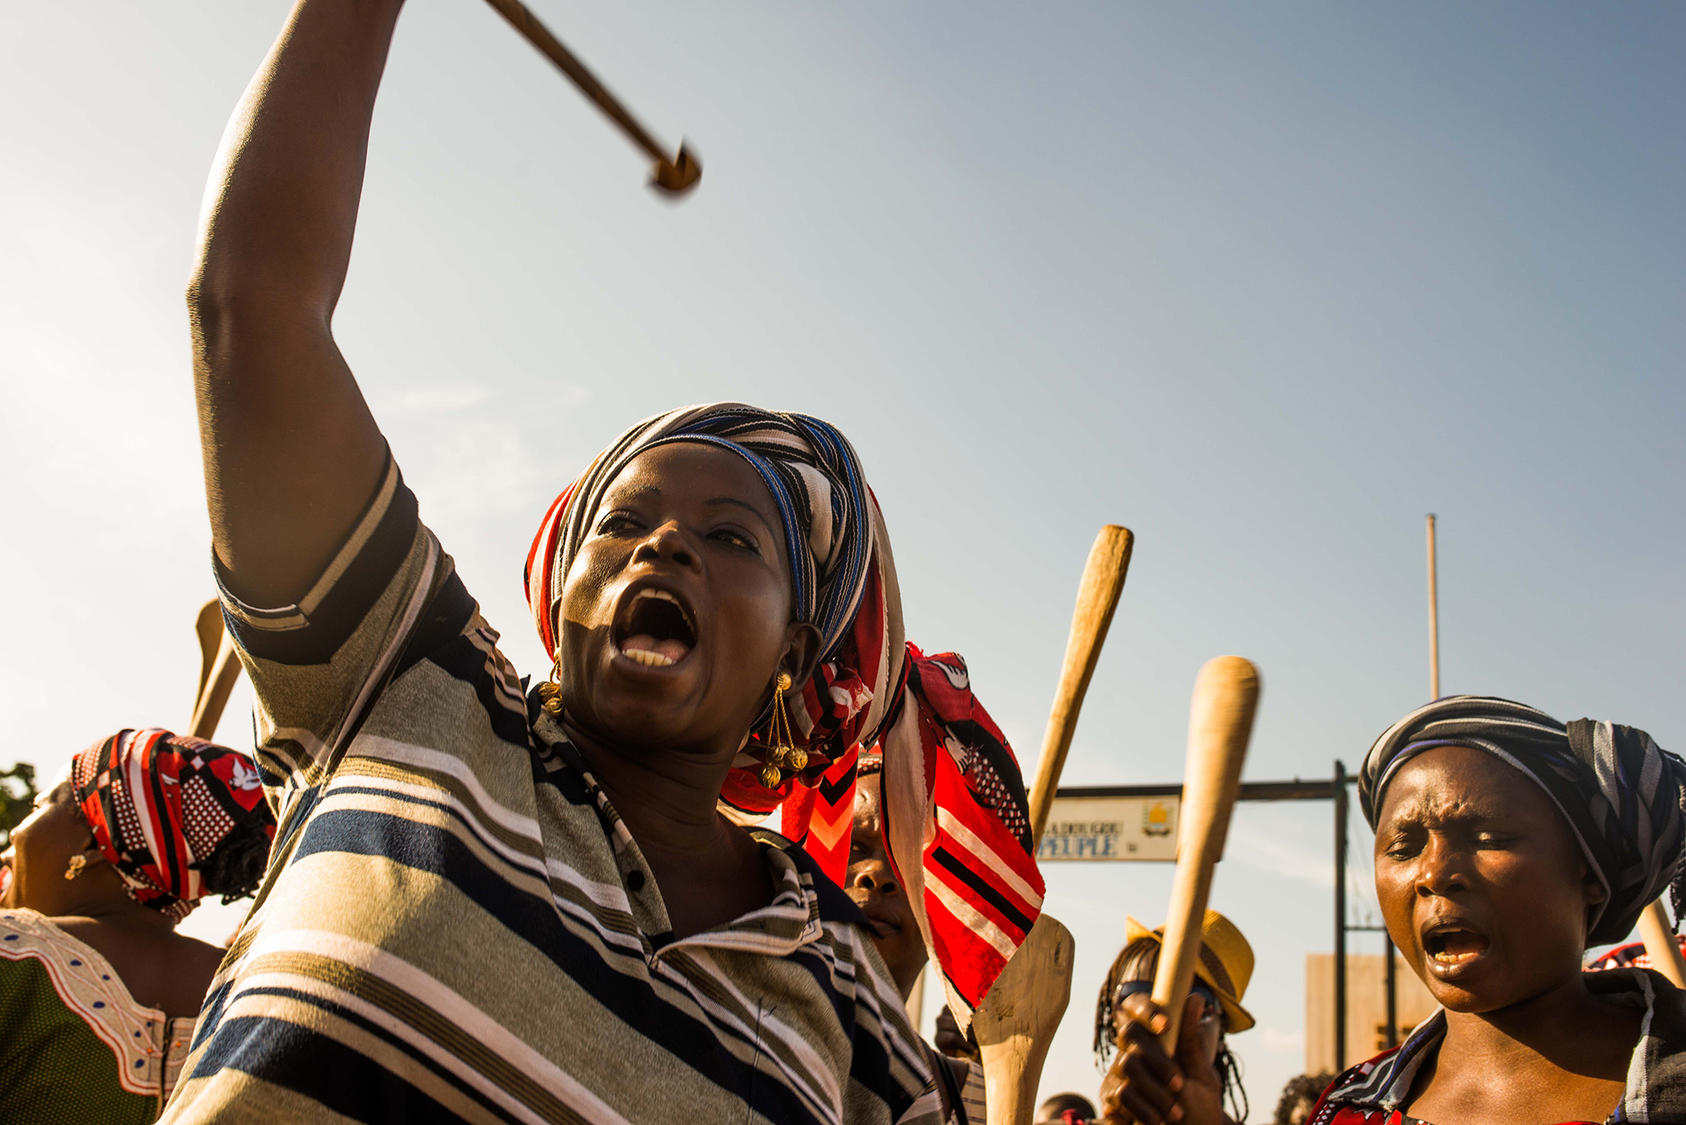 Women take part in a rally in Ouagadougou, Burkina Faso, on October 27, 2014, opposing President Blaise Compaoré’s attempt to seek another term. (Theo Renaut/AP)